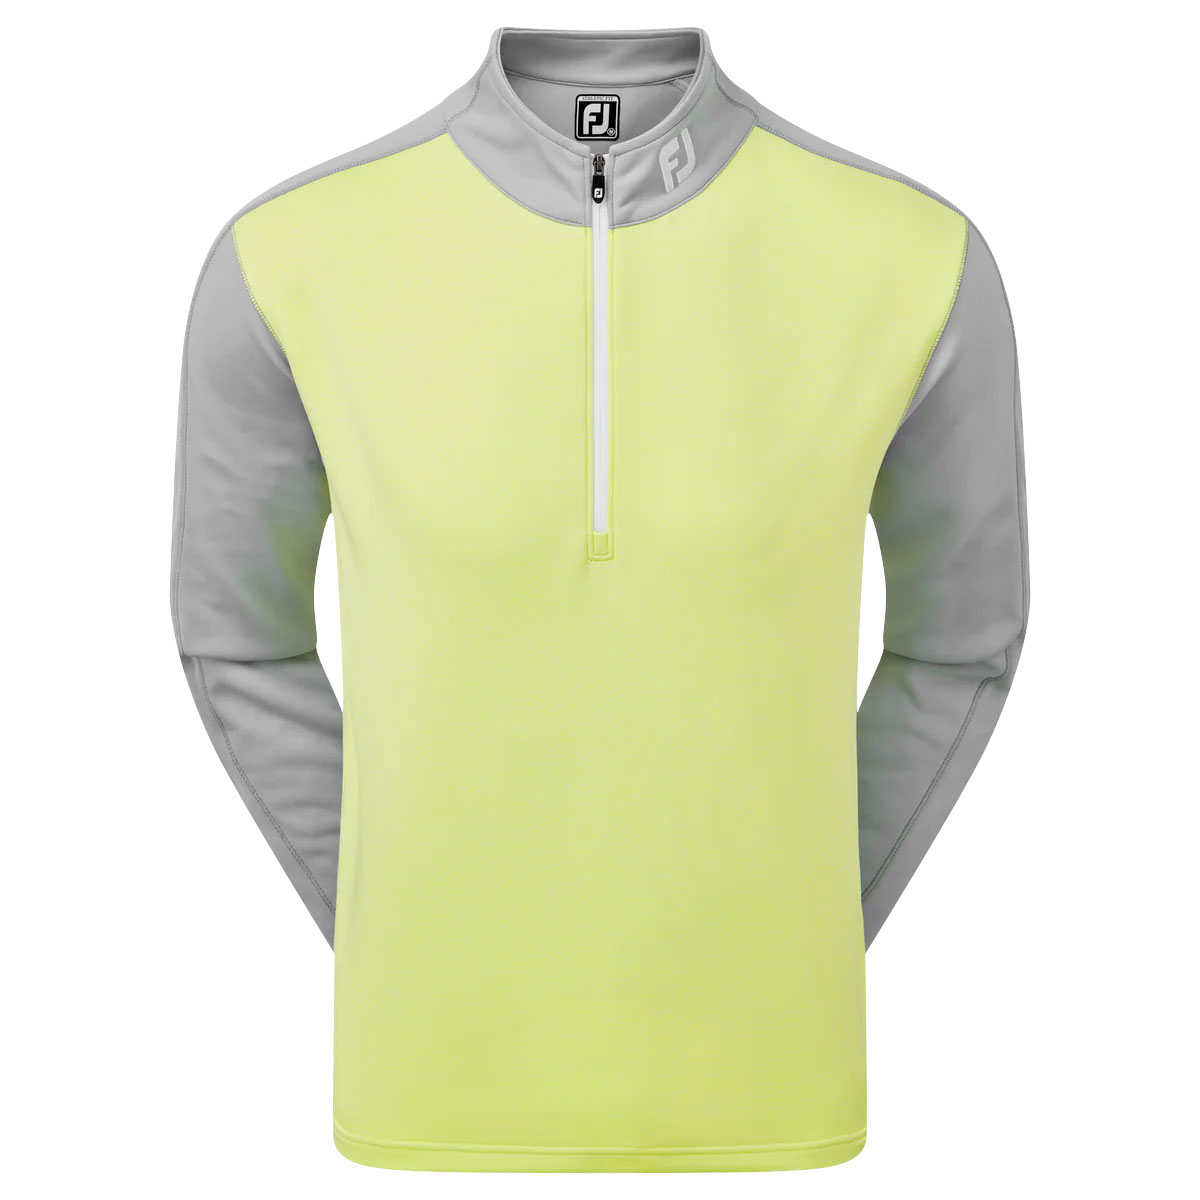 FootJoy Heather Colour Block Chill-Out Mens Golf Pullover  - Grey/Heather Lime